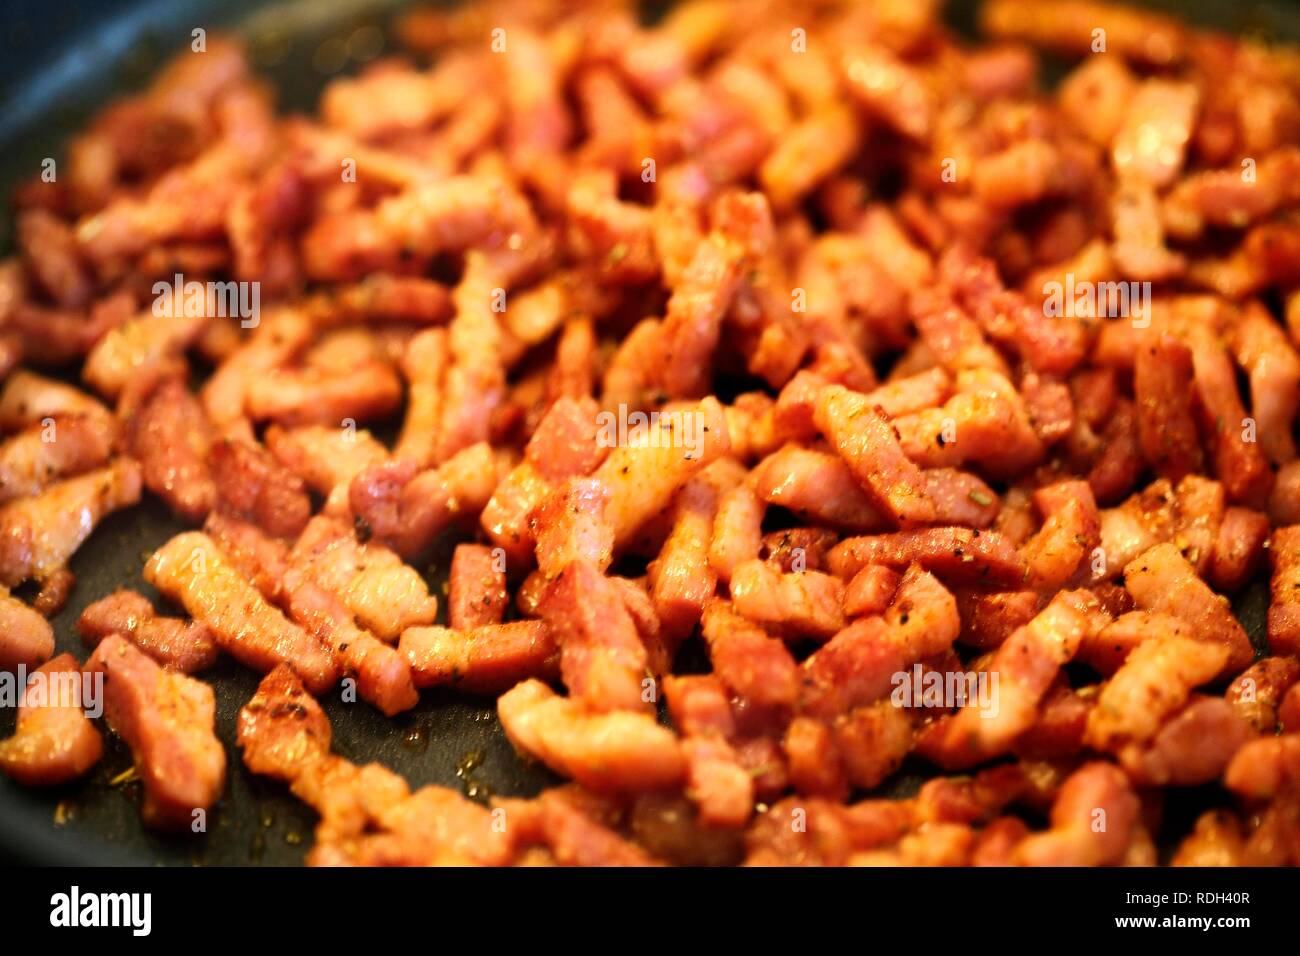 Bacon strips being fried in a pan Stock Photo